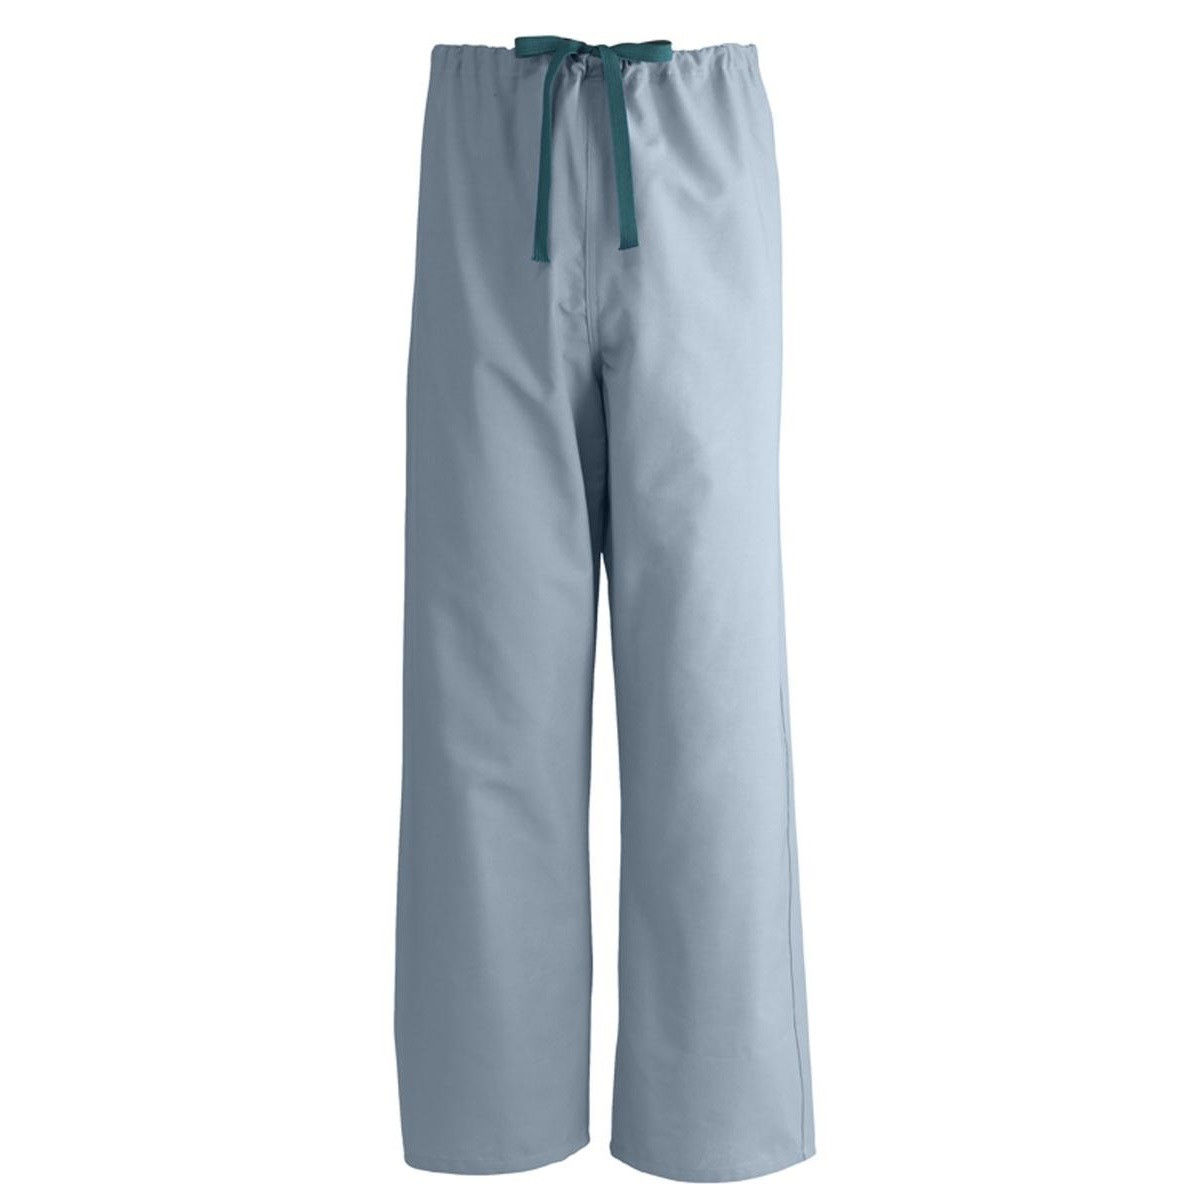 What material is used to make the Misty Green Scrubs by EconoBlen™?